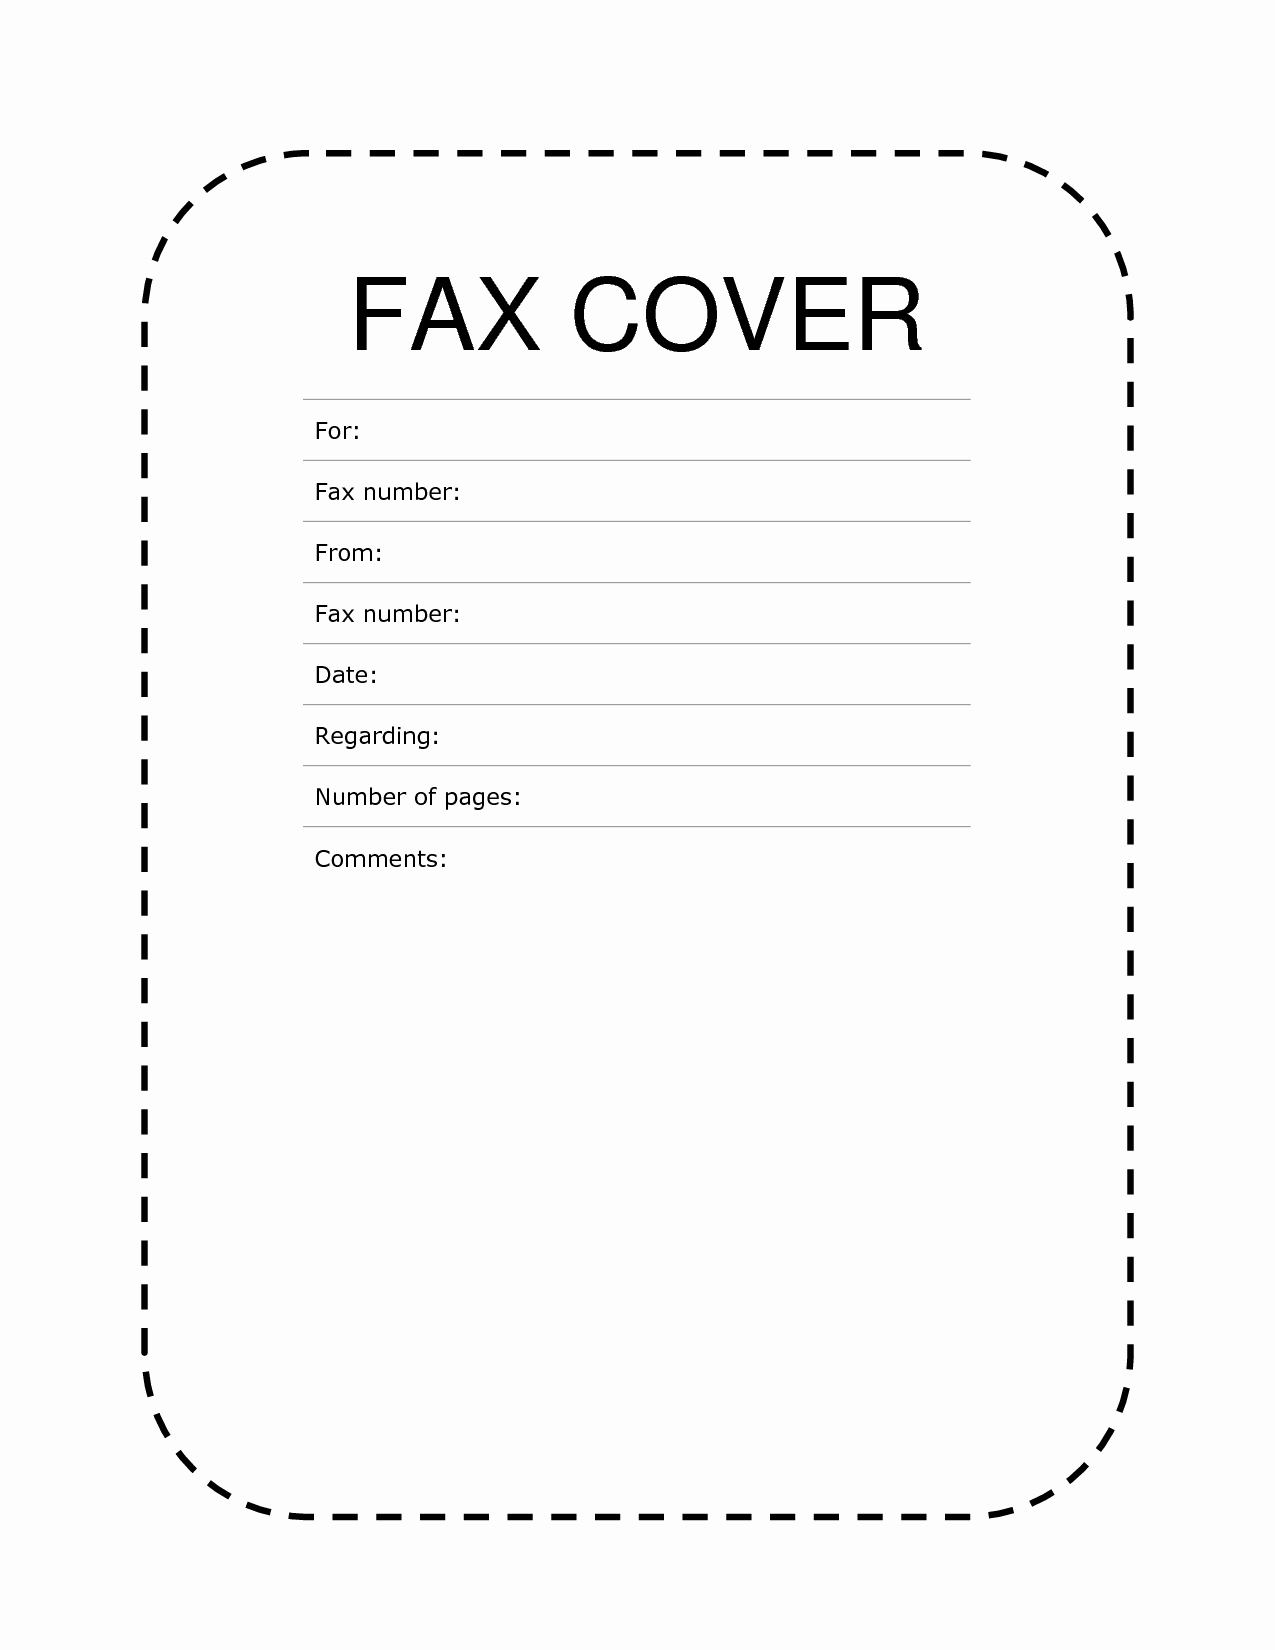 Free Printable Cover Letter Of Free Printable Blank Fax Cover Sheet - Free Printable Cover Letter For Fax